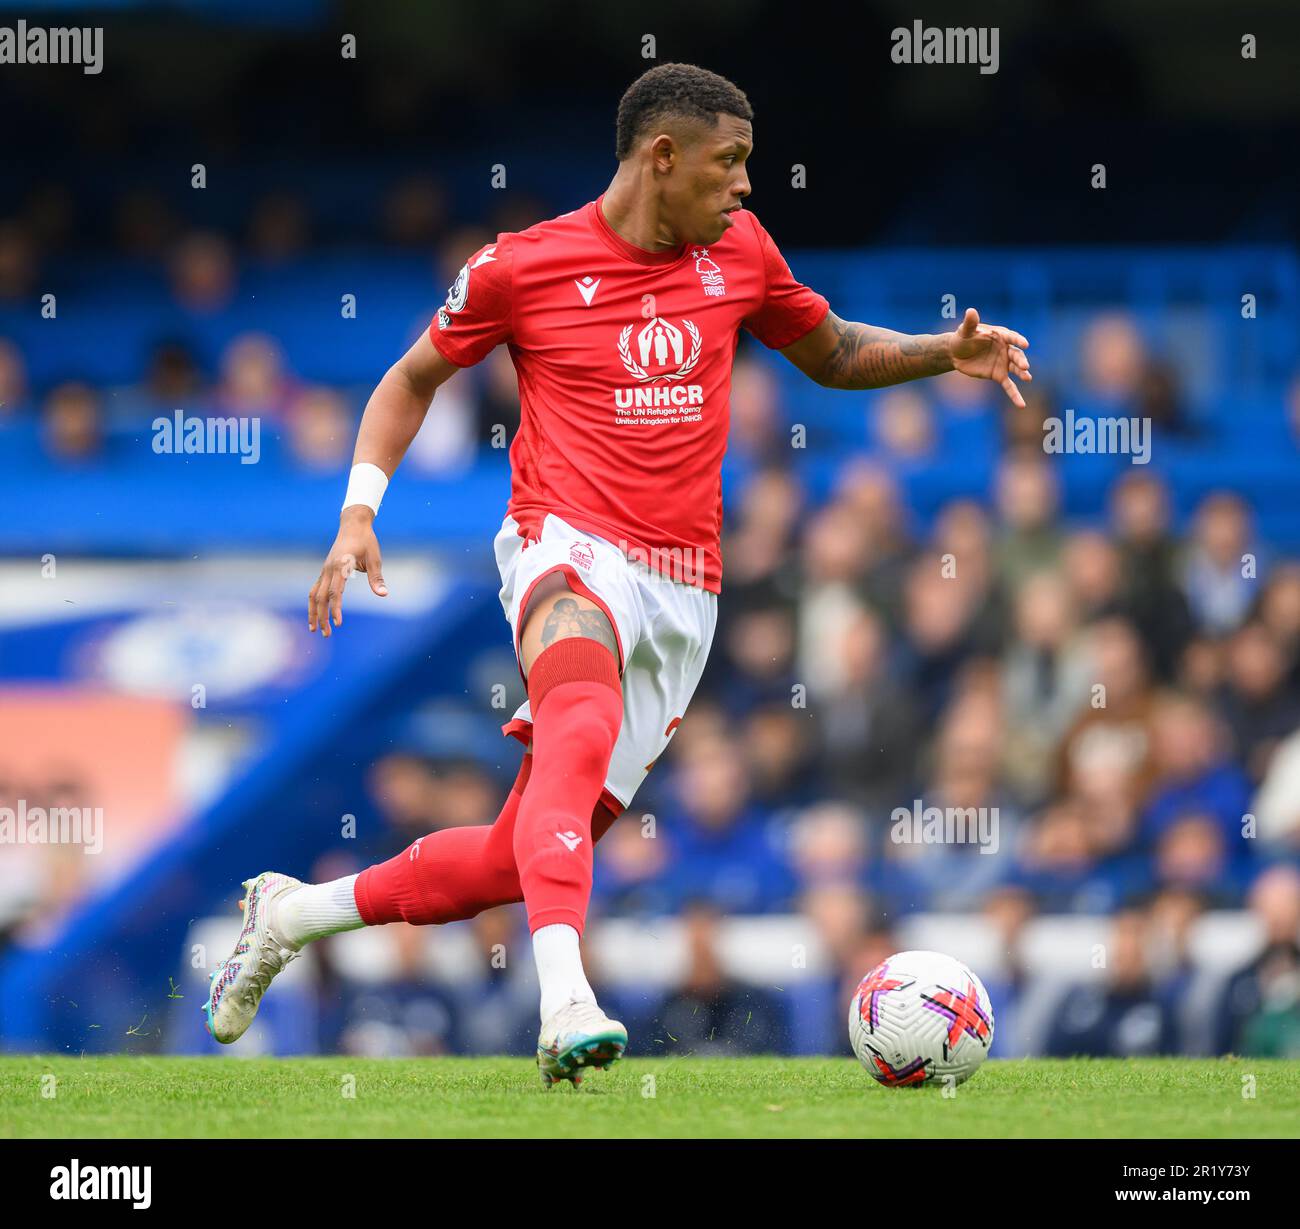 London, UK. 13th May, 2023. 13 May 2023 - Chelsea v Nottingham Forest - Premier League - Stamford Bridge Nottingham Forest's Danilo during the Premier League match at Stamford Bridge, London. Picture Credit: Mark Pain/Alamy Live News Stock Photo